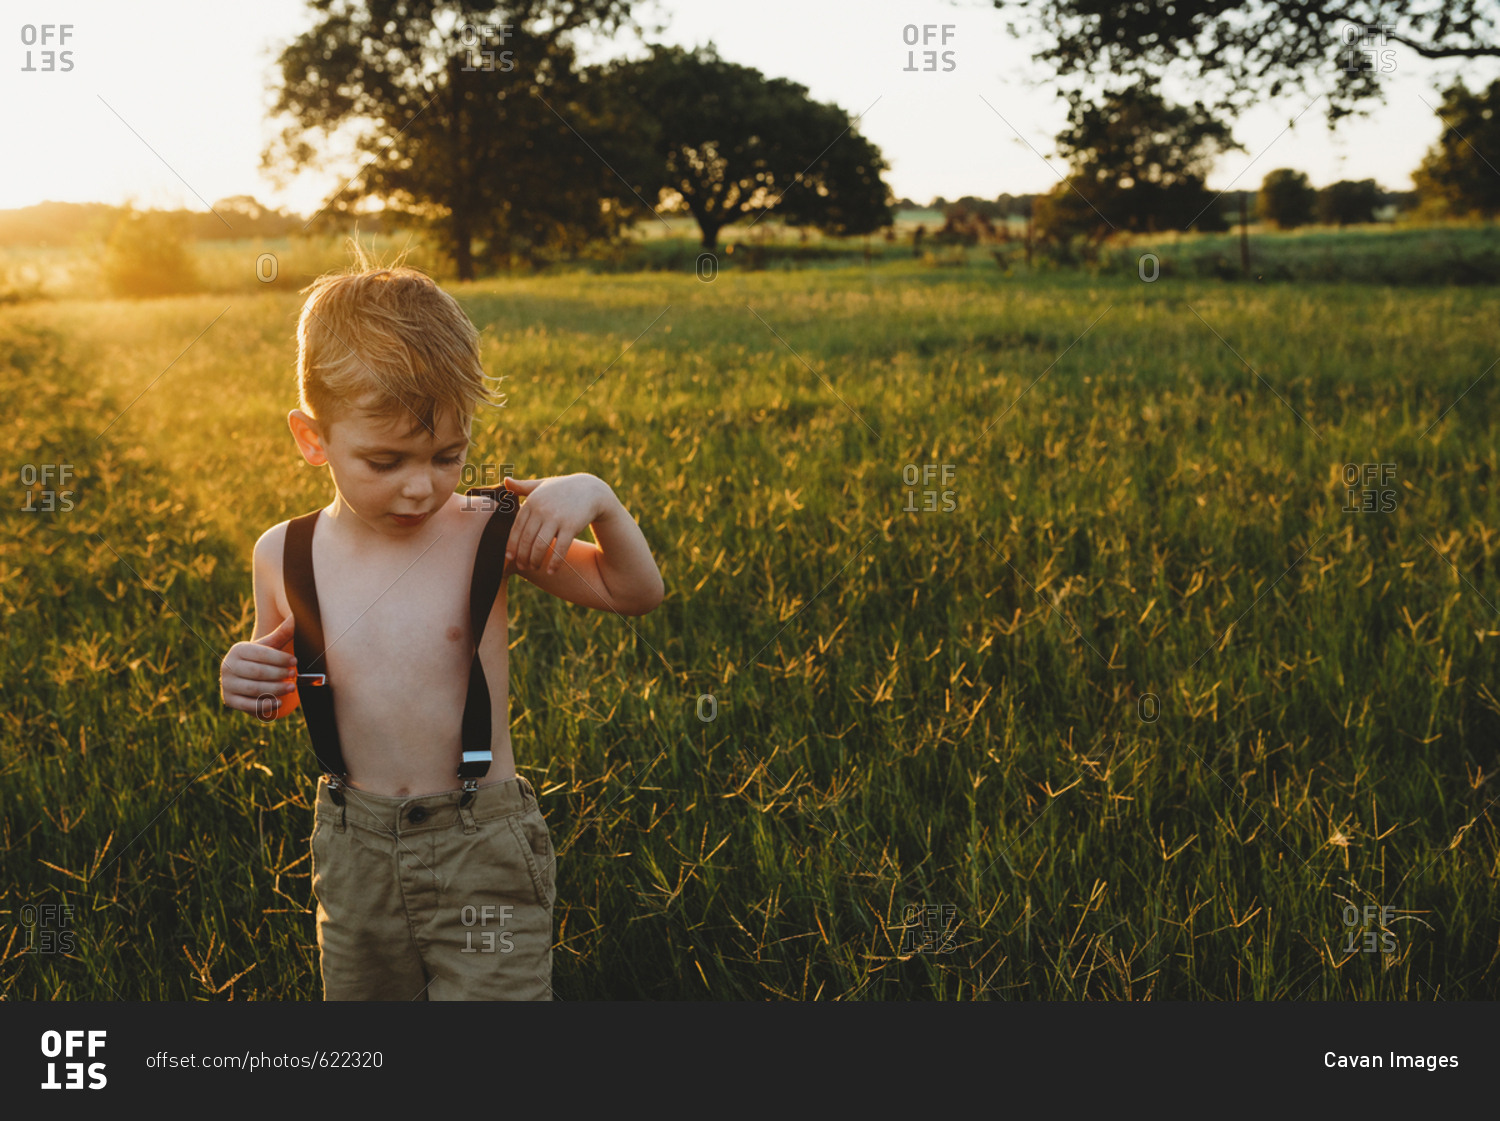 Shirtless boy wearing suspenders while standing amidst plants on field ...